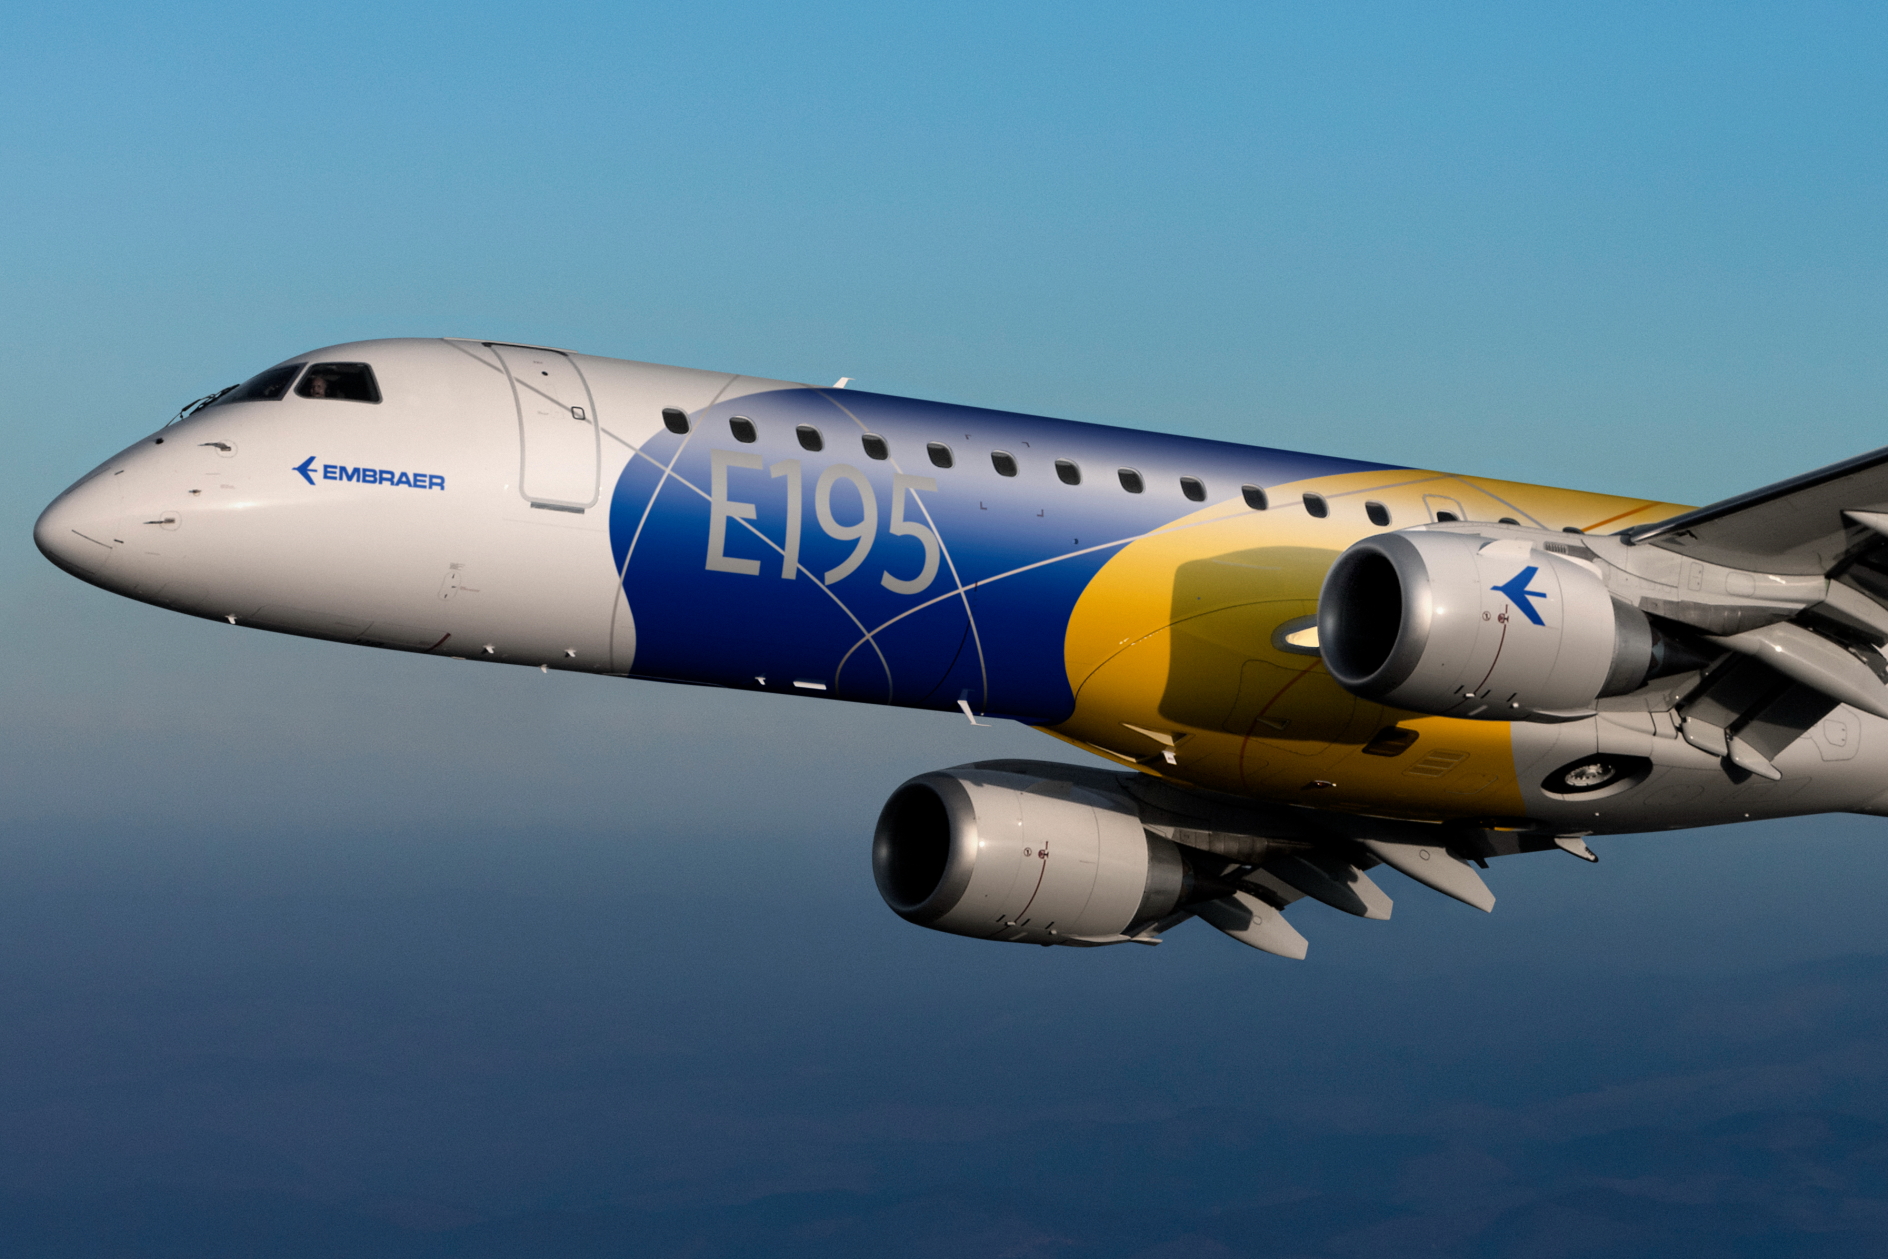 Embraer E195. Click to enlarge.